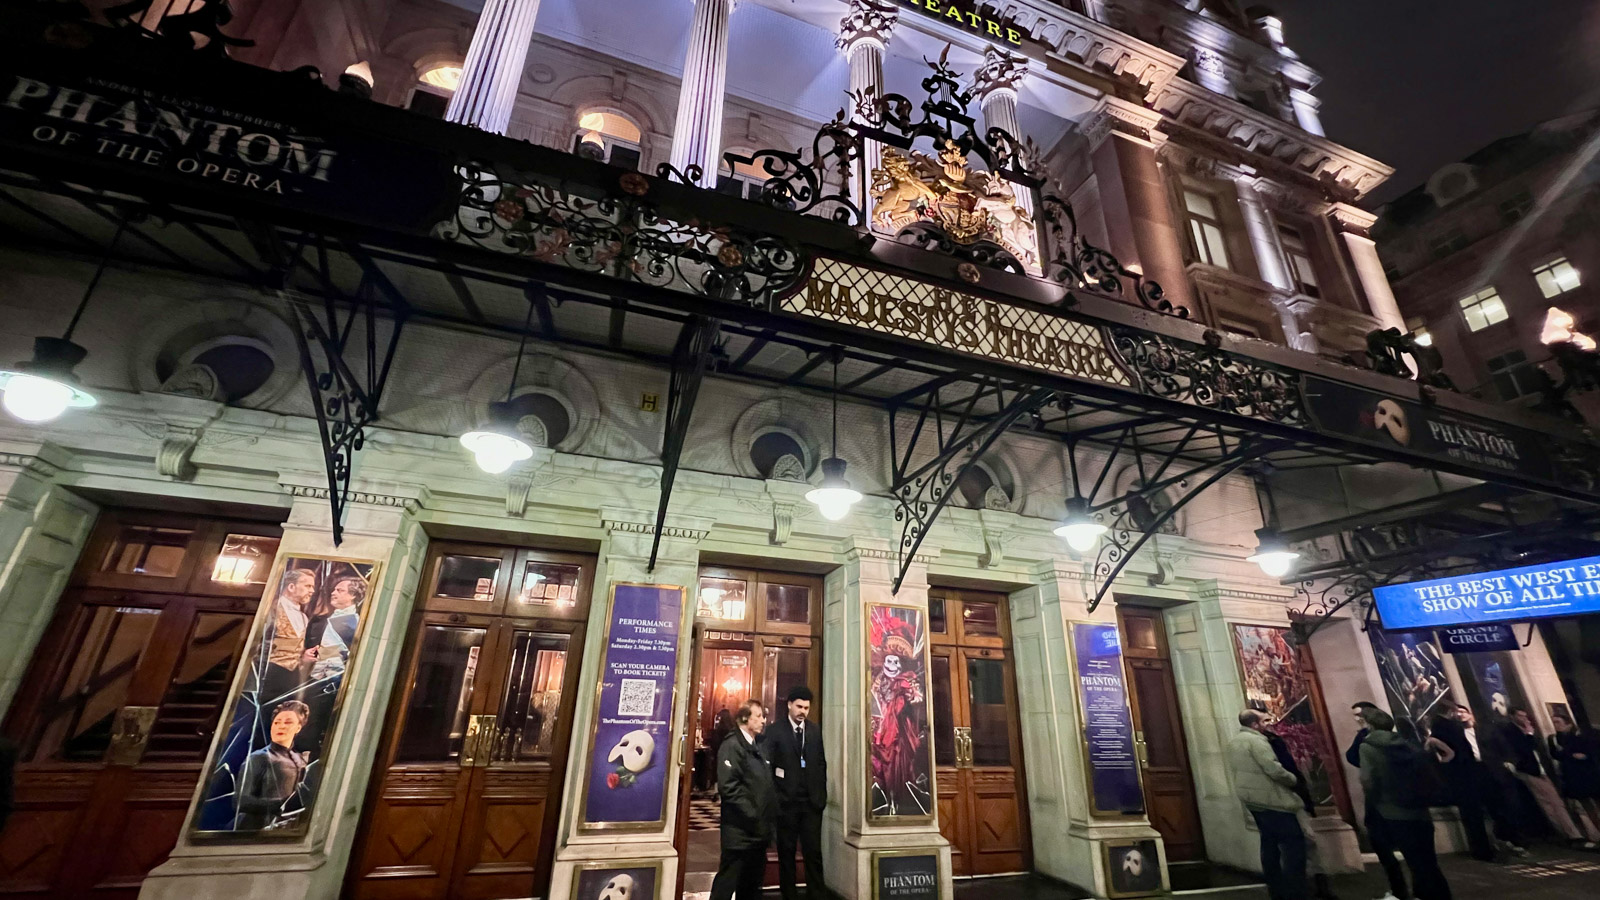 Her Majesty's Theatre London